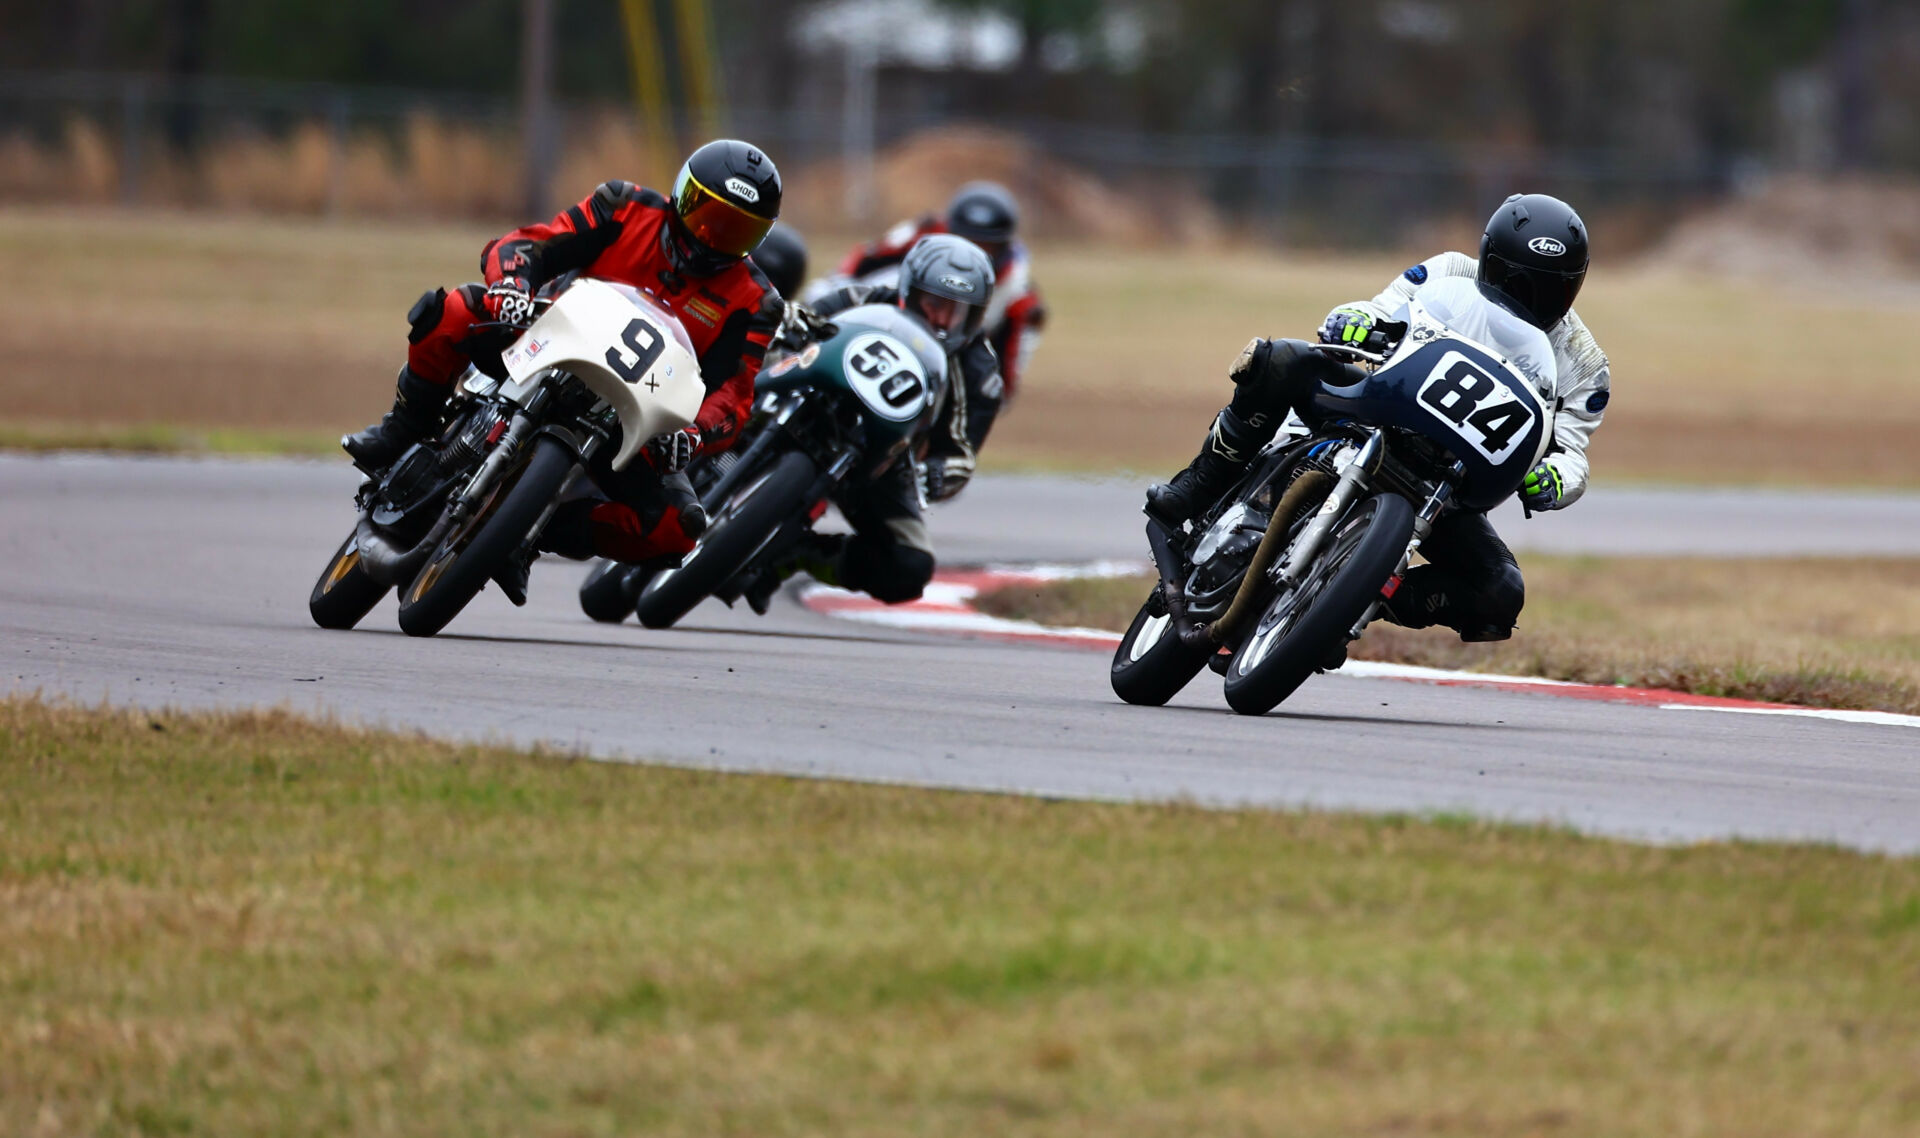 Jeff Hargis (84) leads Tony Read (50) and Mark Morrow (9X) during a Formula 750 race at Roebling Road Raceway. Photo by etechphoto.com, courtesy AHRMA.